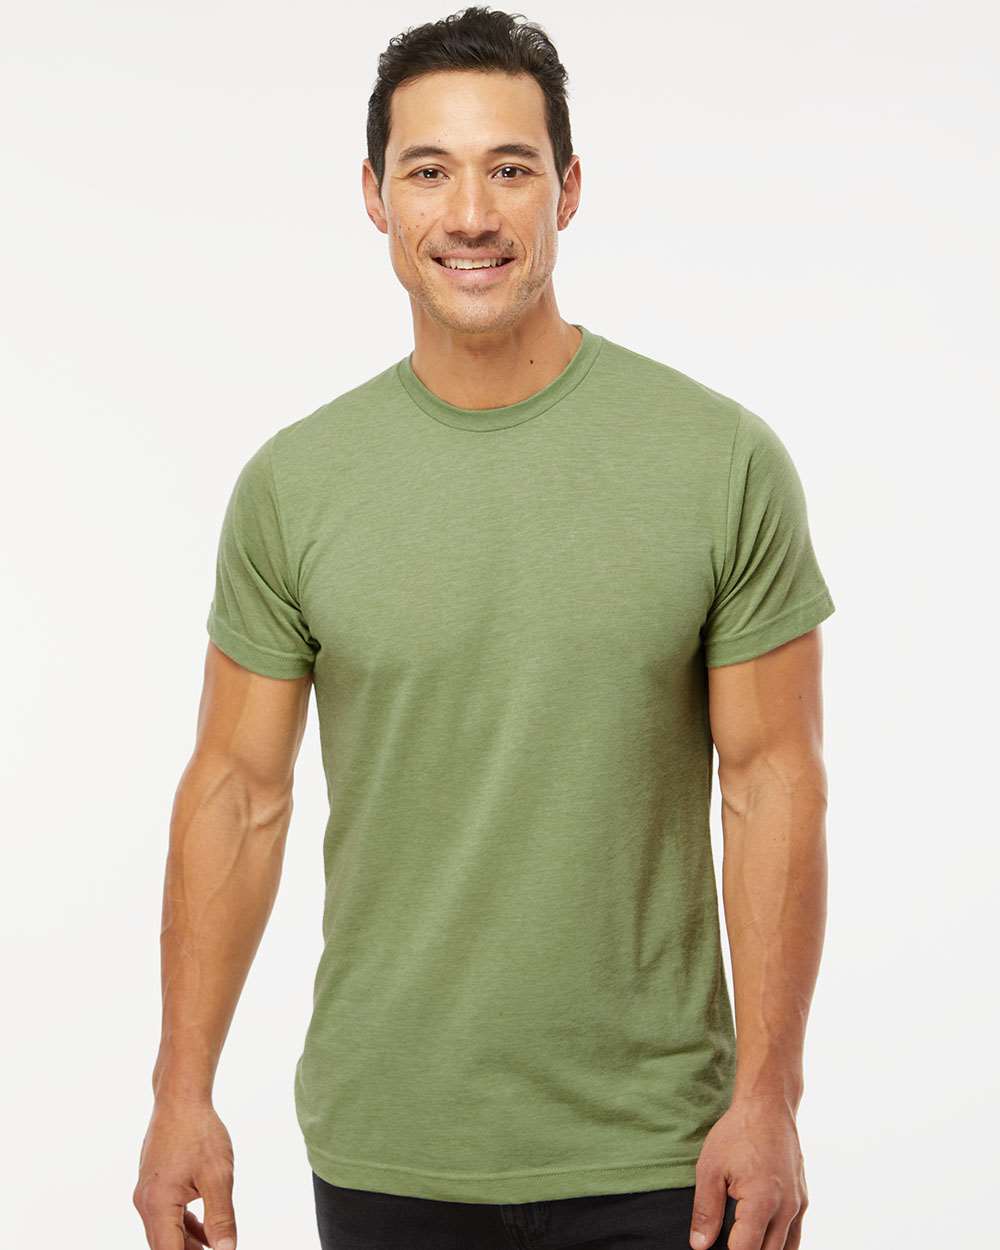 M&O Women’s Deluxe Blend T-Shirt #3540 Heather Green Front